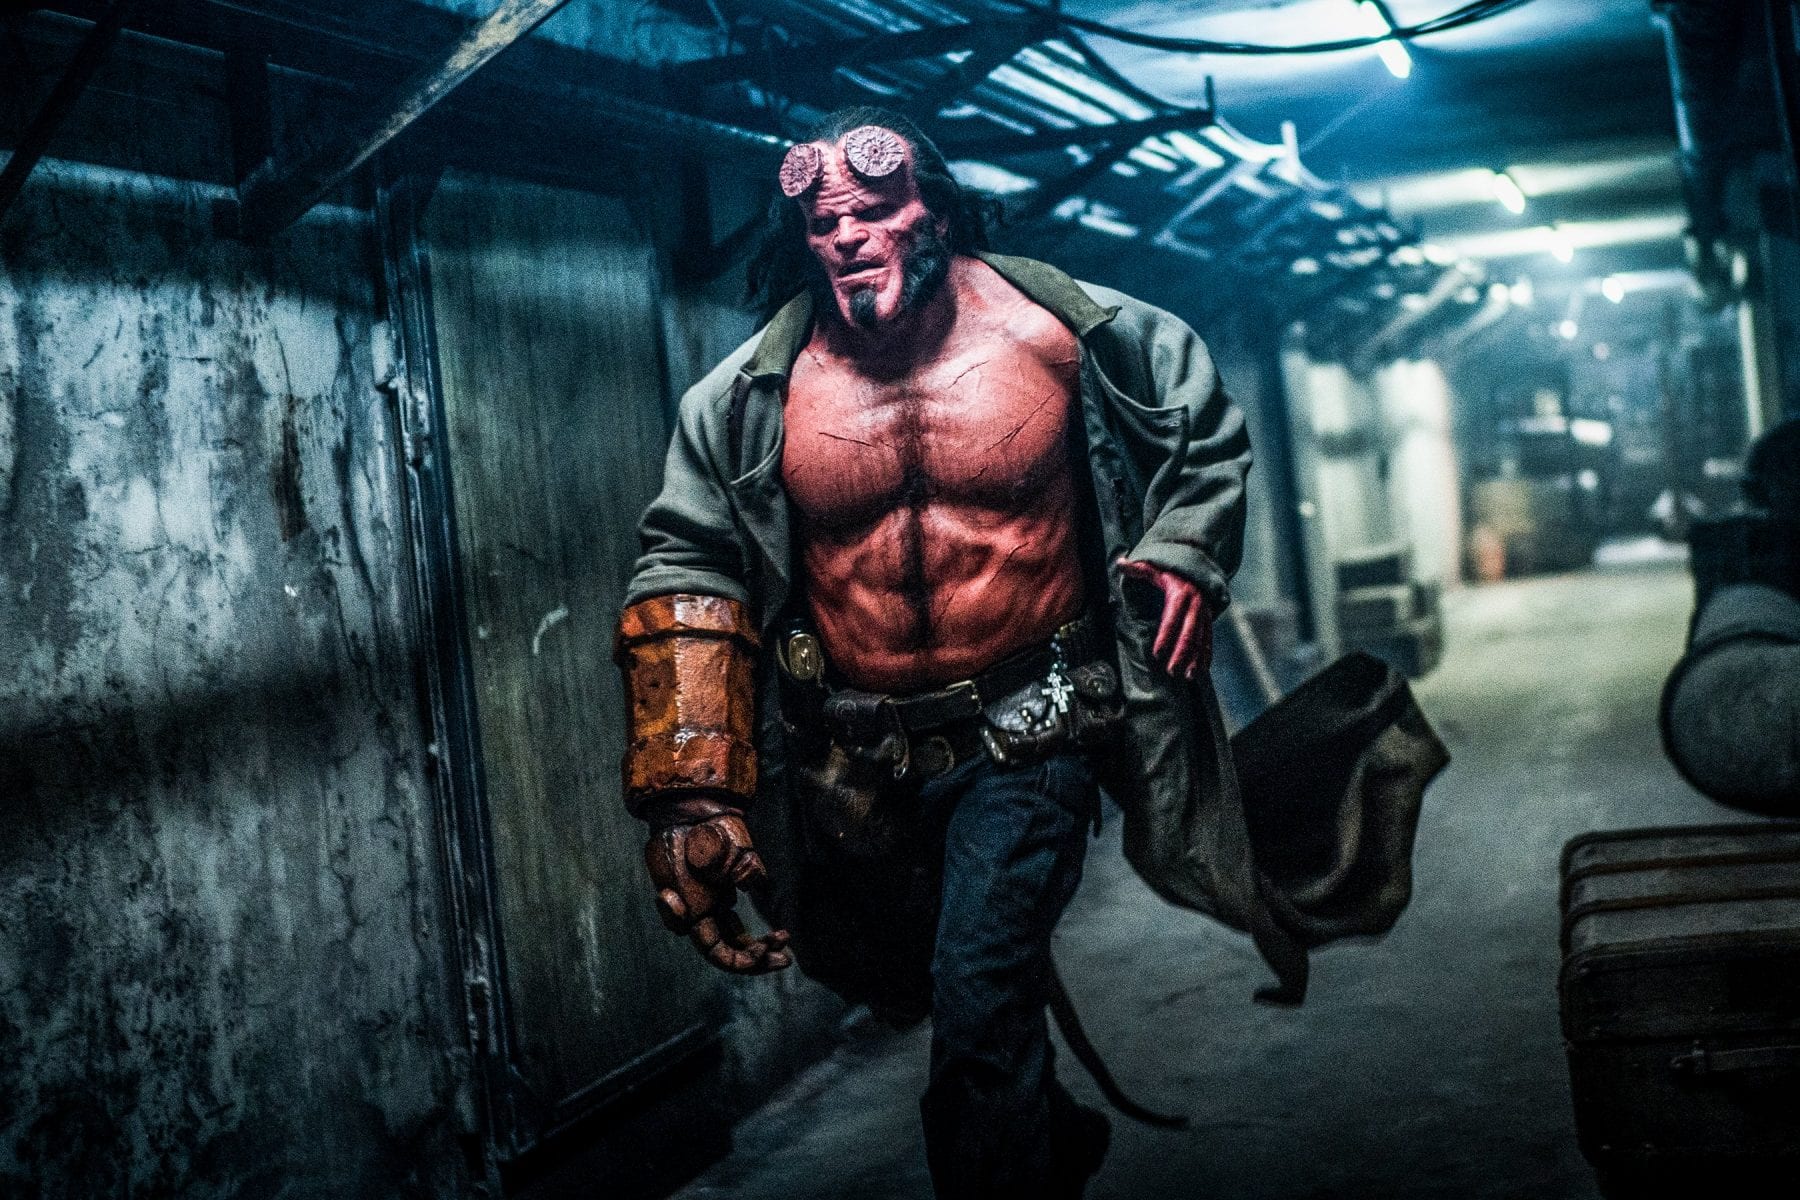 Hellboy (David Harbour) rushes into action to save the world from monsters and demons. 